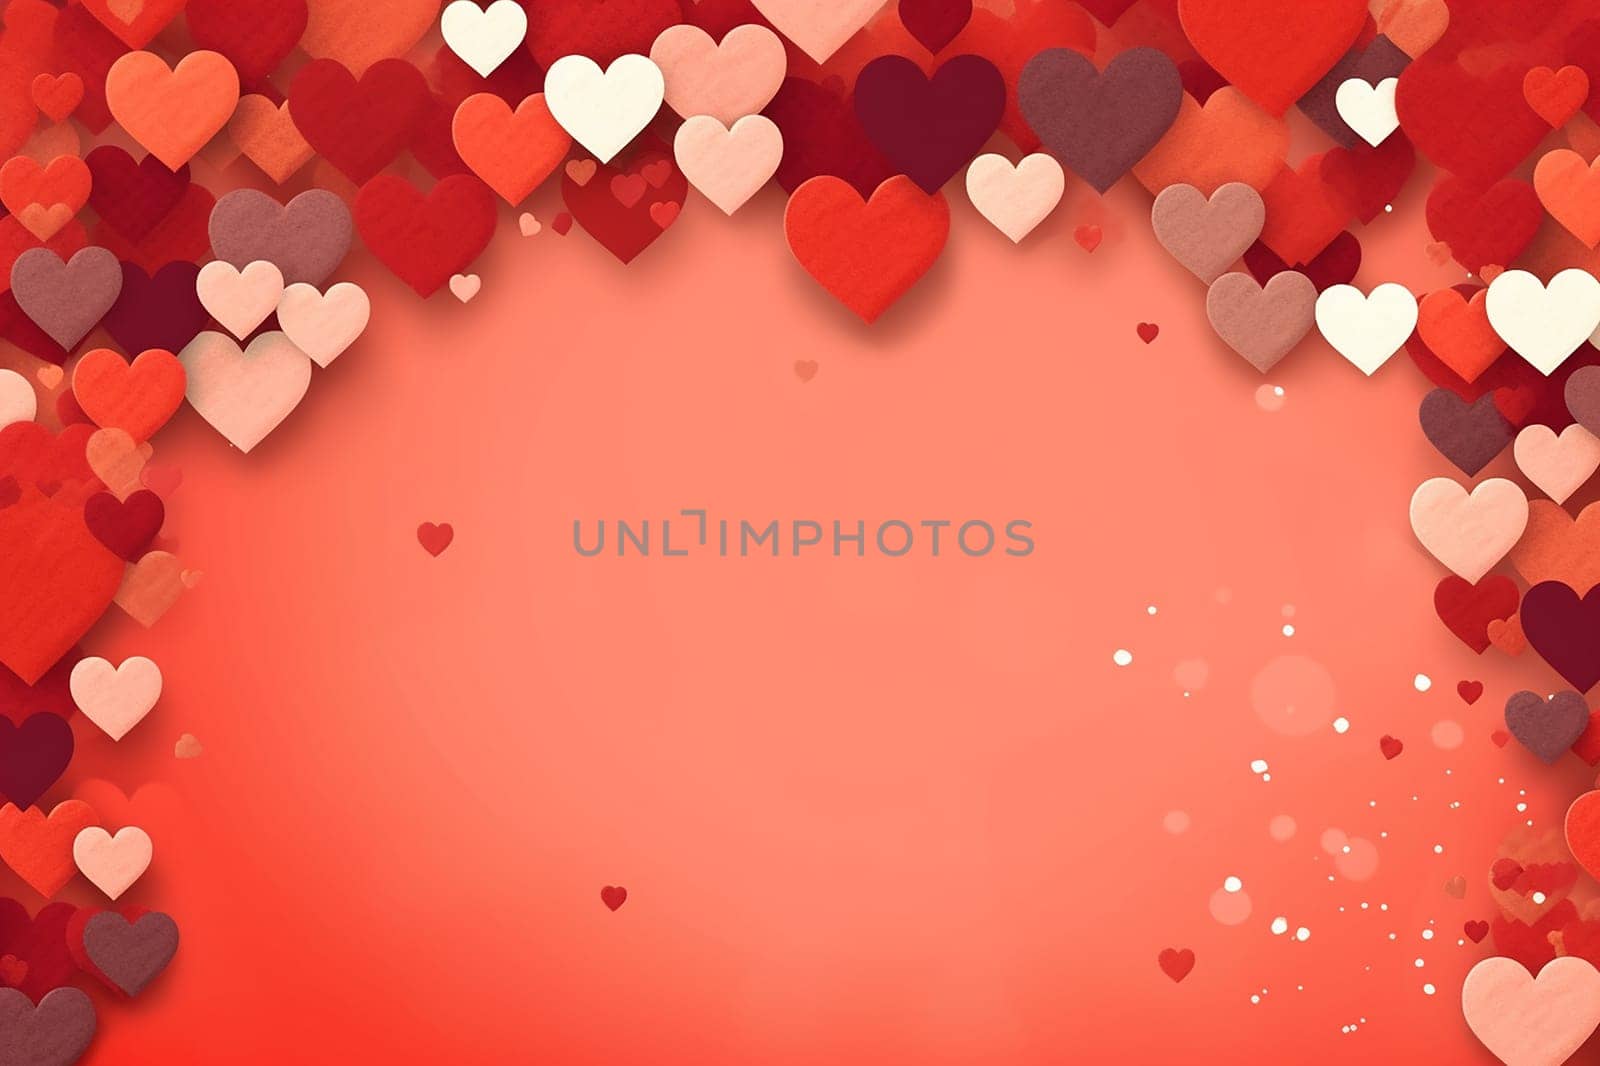 Various red and white hearts on a gradient red background, representing love and Valentine's Day.